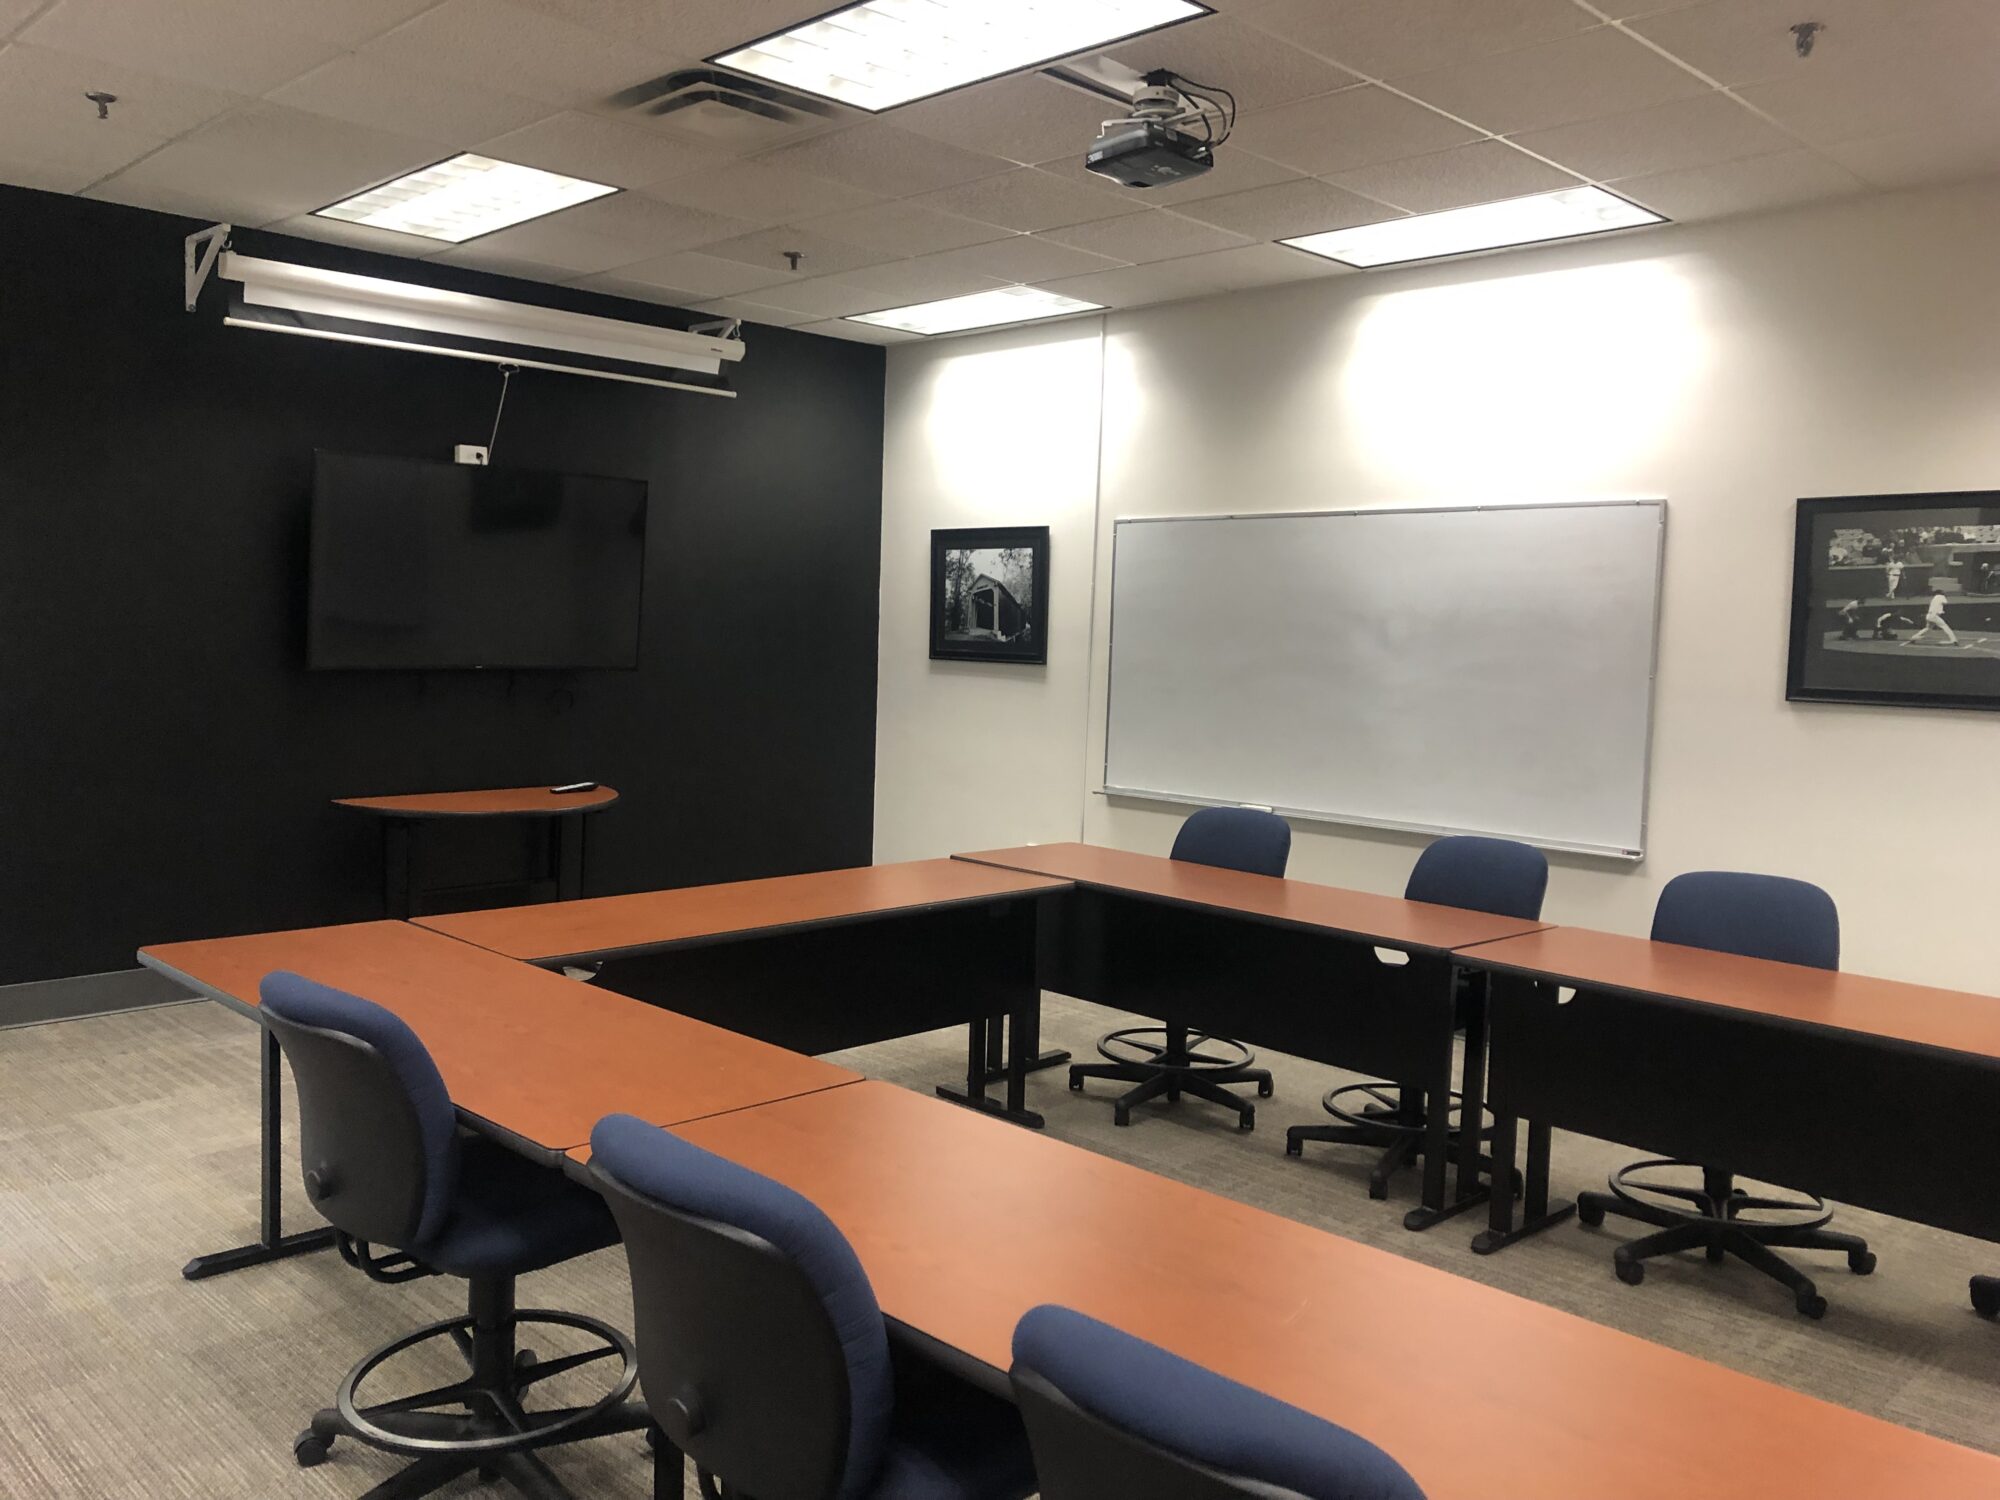 Meeting spaces available to public